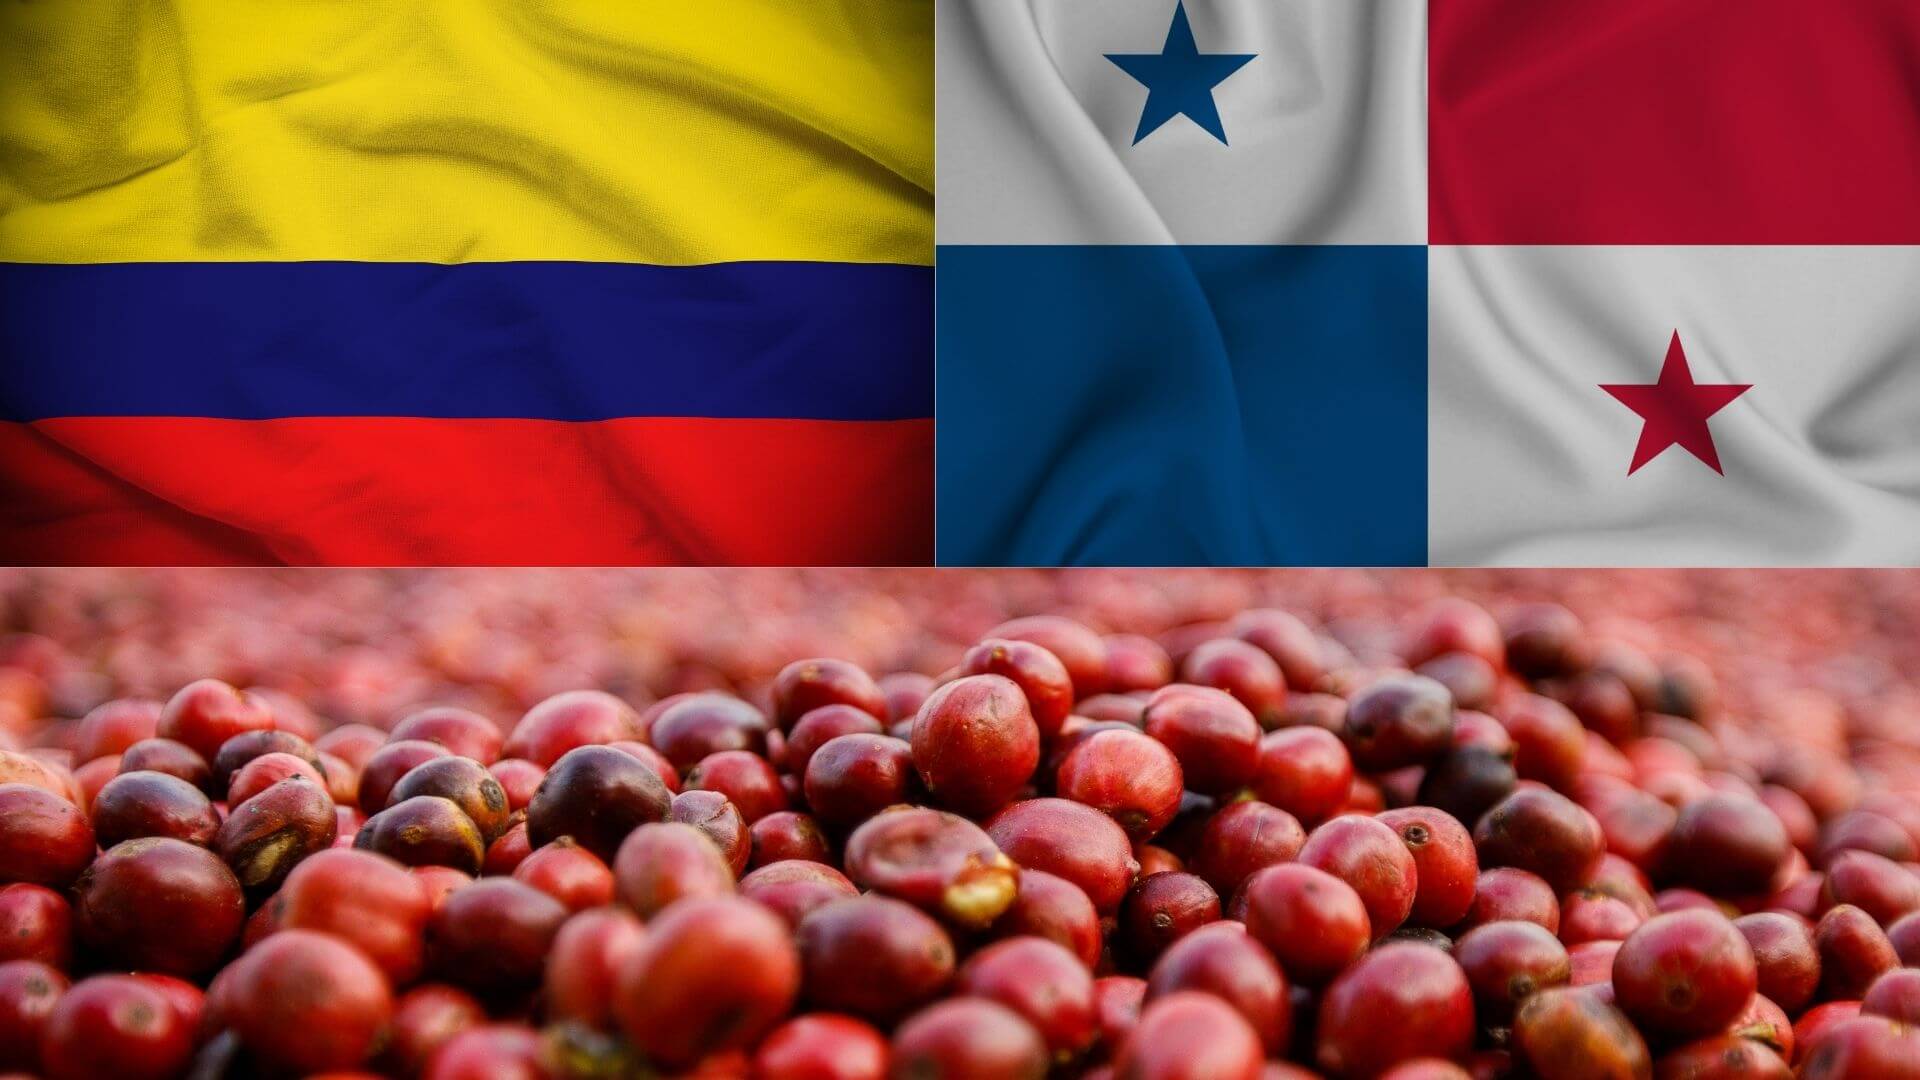 International Coffee Farms - A Potential Investment?